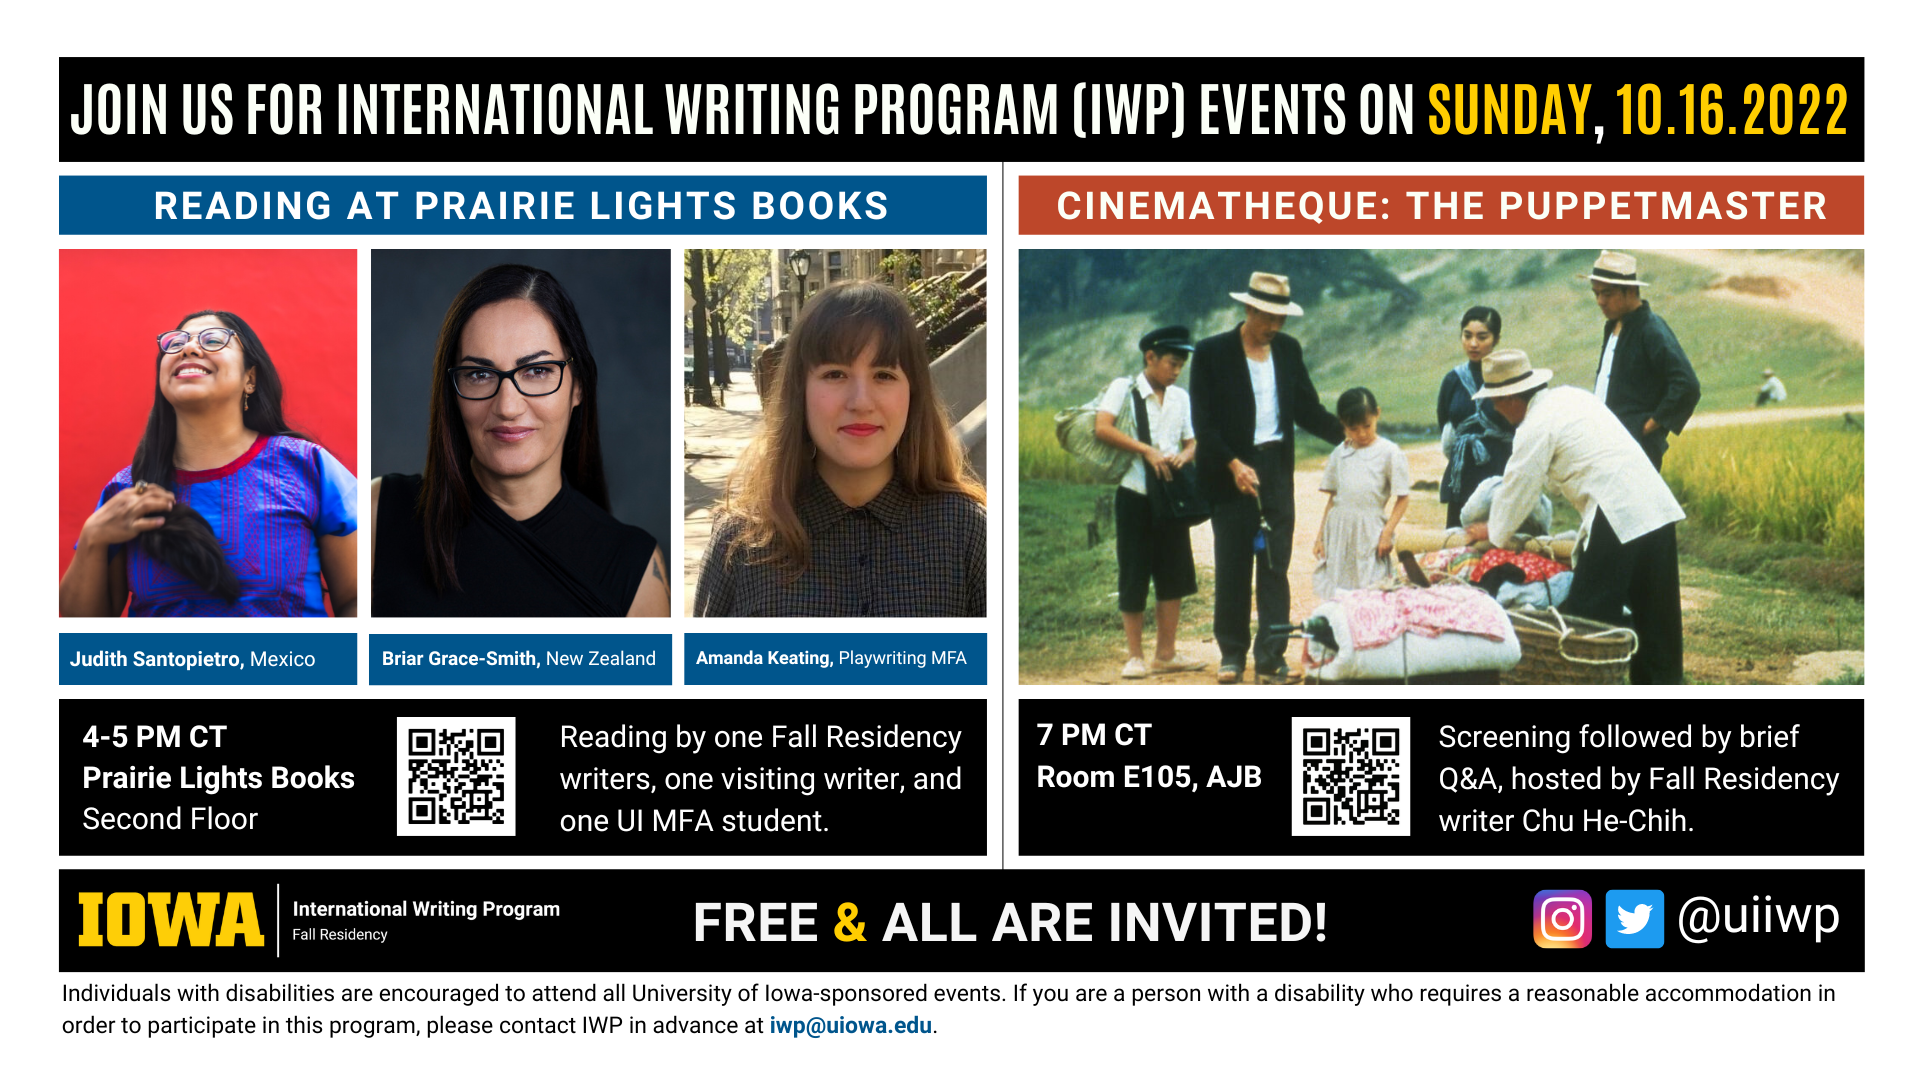 An image with two halves, each advertising one event. The image as a whole is labeled "Join us for International Writing Program (IWP) Events on Sunday, 10.16.2022. The left half left of the image is labeled "Reading at Prairie Lights Books." There are portraits of three writers (named below) and the following text: "Judith Santopietro, Mexico. Briar Grace-Smith, New Zealand. Amanda Keating, Playwriting MFA." 4-5 PM CT Prairie Lights Books, Second Floor. Reading by one Fall Residency writer, one visiting writer, and one UI MFA student." The right half of the image is labeled "Cinematheque: The Puppetmaster. Below that heading there is a screenshot from the film, featuring several people in a Taiwanese countryside examining a bundle of colorful textiles. The following text appears below: "7 PM CT, Room E105 AJB. Screening followed by brief Q&A, hosted by Fall Residency writer Chu He-Chih." Below that text there are the IWP Fall Residency logo, the Instagram and Twitter handle @uiiwp, and a note that the event is “Free & All Are Invited.” The following text is at the bottom of the image: "Individuals with disabilities are encouraged to attend all University of Iowa-sponsored events. If you are a person with a disability who requires a reasonable accommodation in order to participate in this program, please contact IWP in advance at iwp@uiowa.edu."